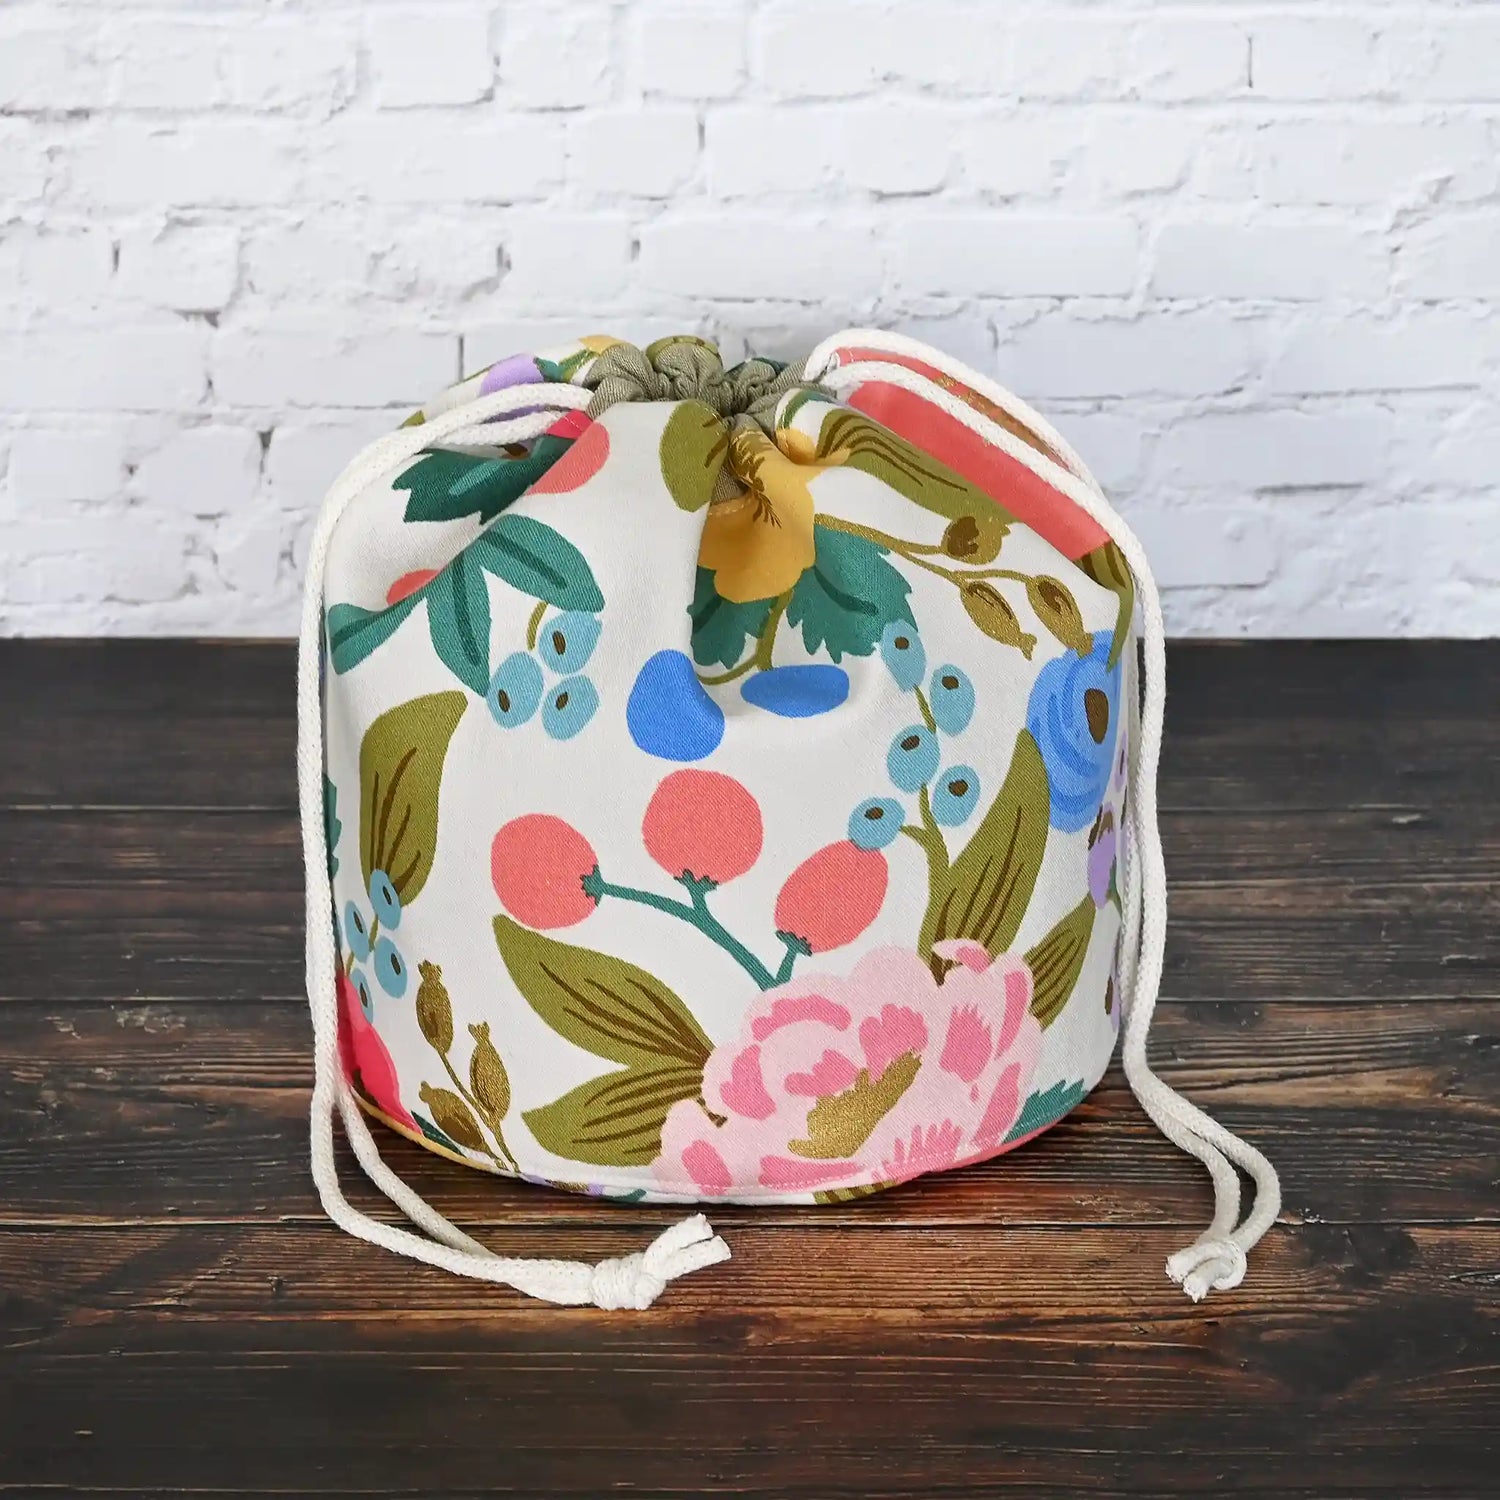 Canvas knitting project bag made from Rifle Paper Co's Antique Garden.  It has lots of pockets and is structured to stand alone.  Made in Canada by Yellow Petal Handmade.